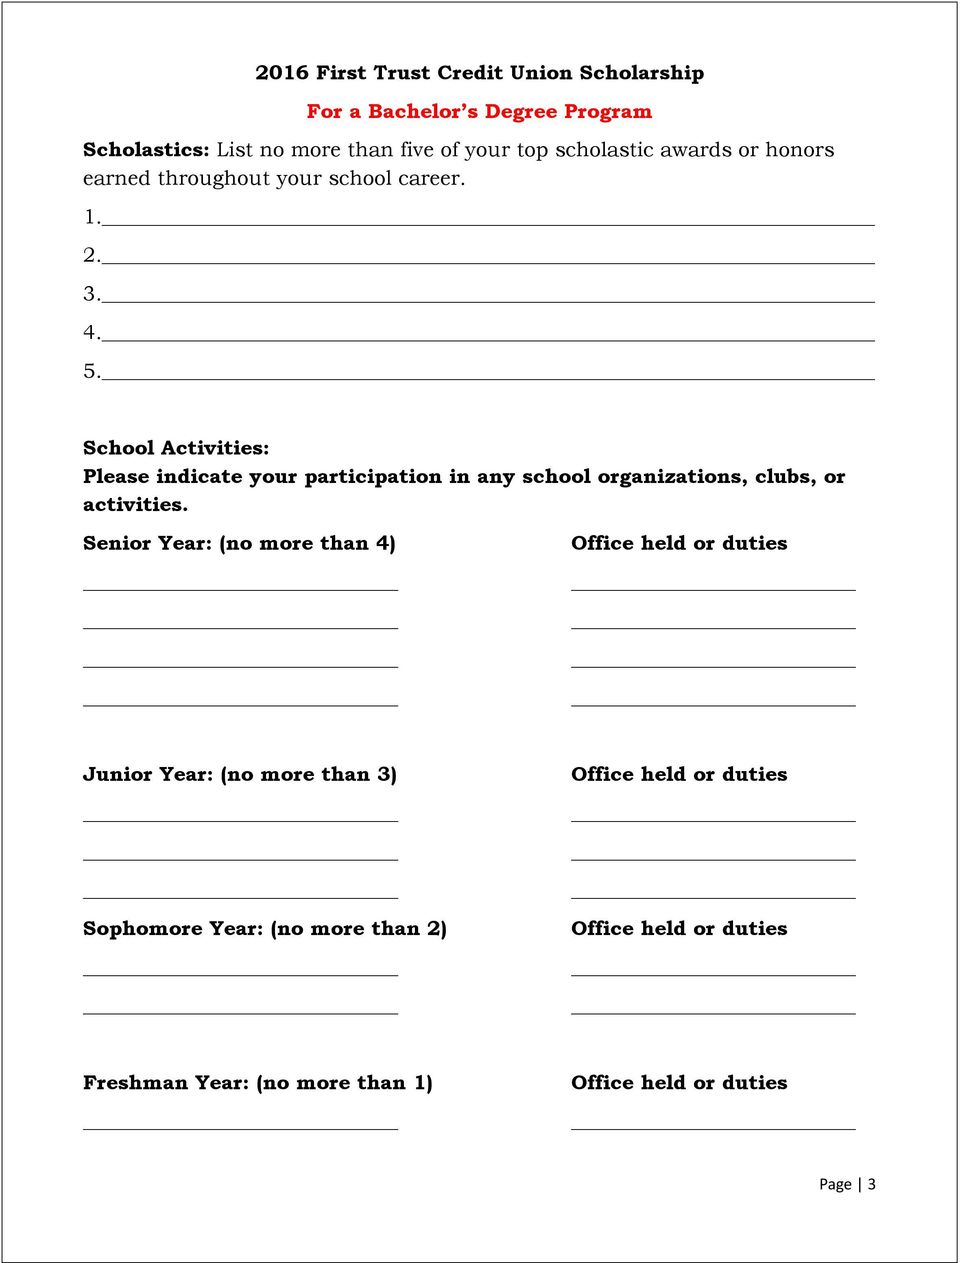 School Activities: Please indicate your participation in any school organizations, clubs,